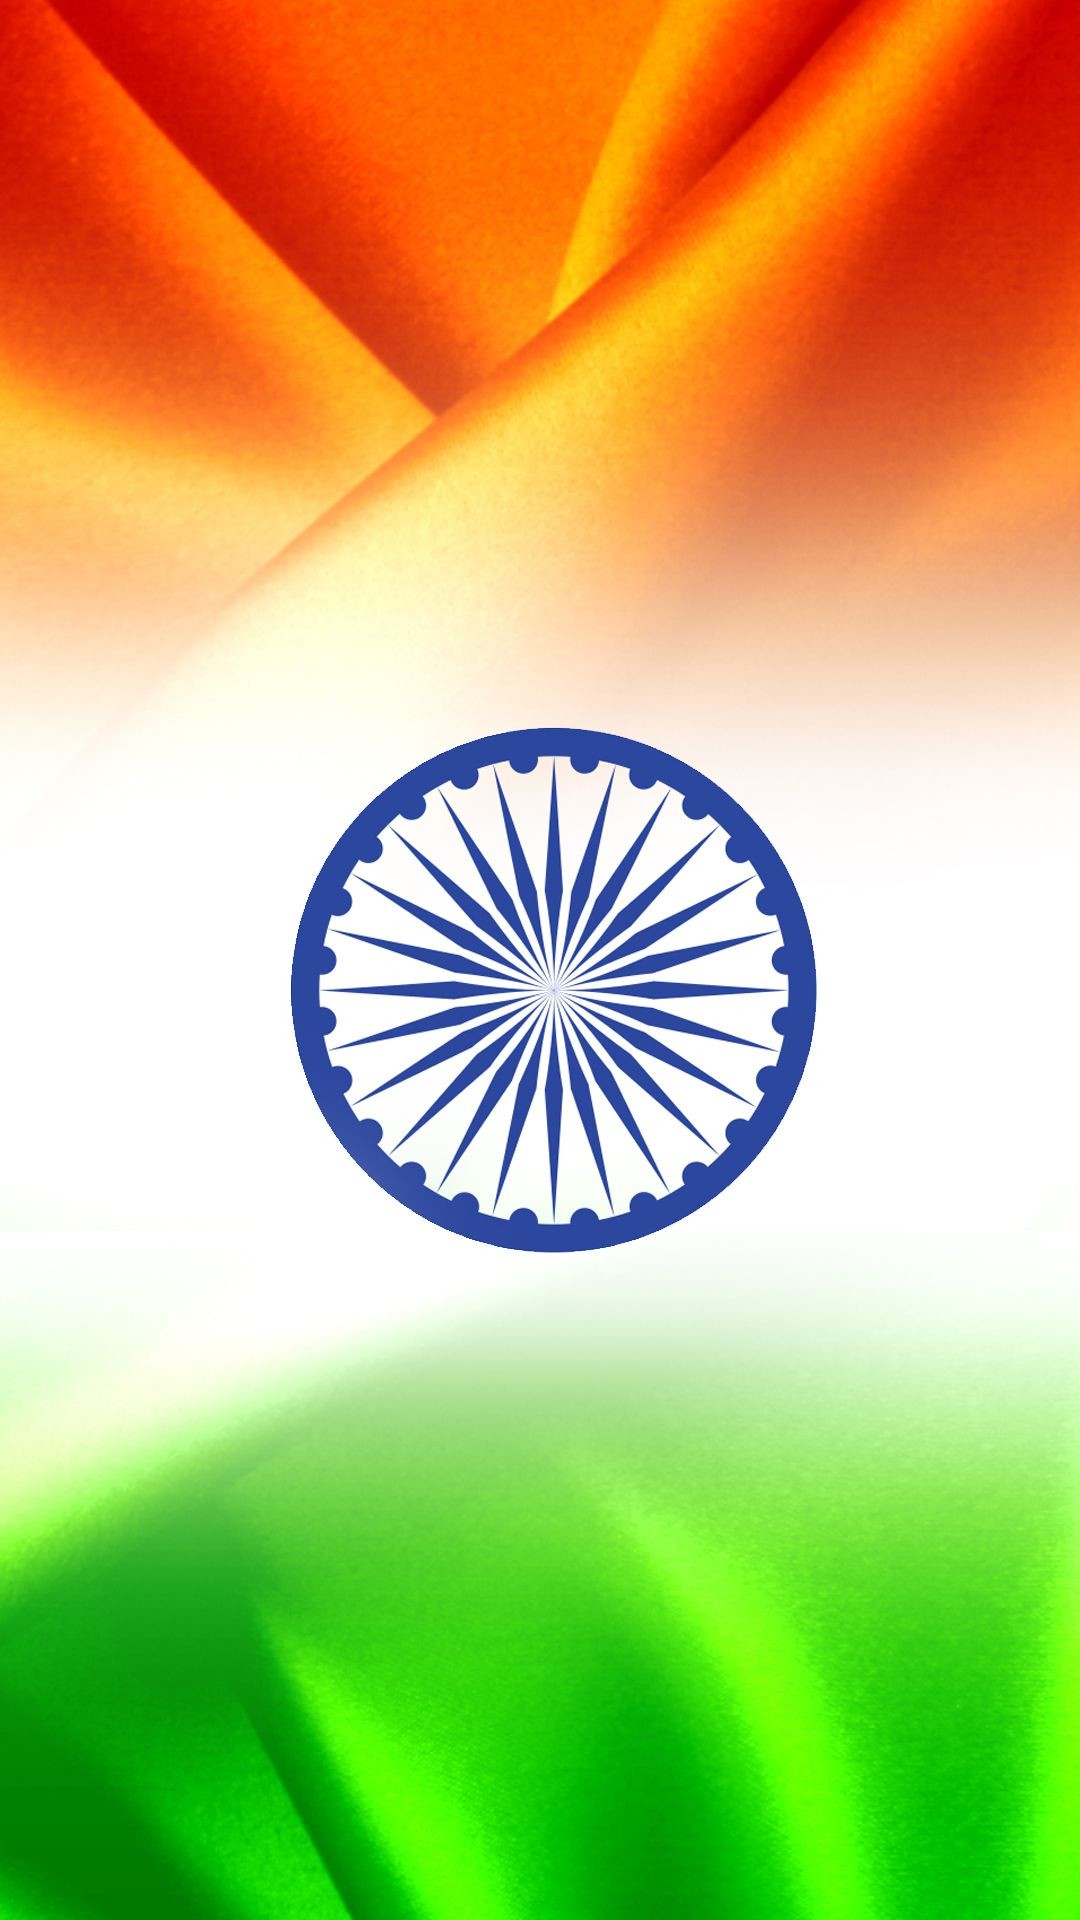 India Flag With Love Shape Hd Wallpapers Images  Indian Flag Wallpaper  High Resolution Hd PNG Image  Transparent PNG Free Download on SeekPNG